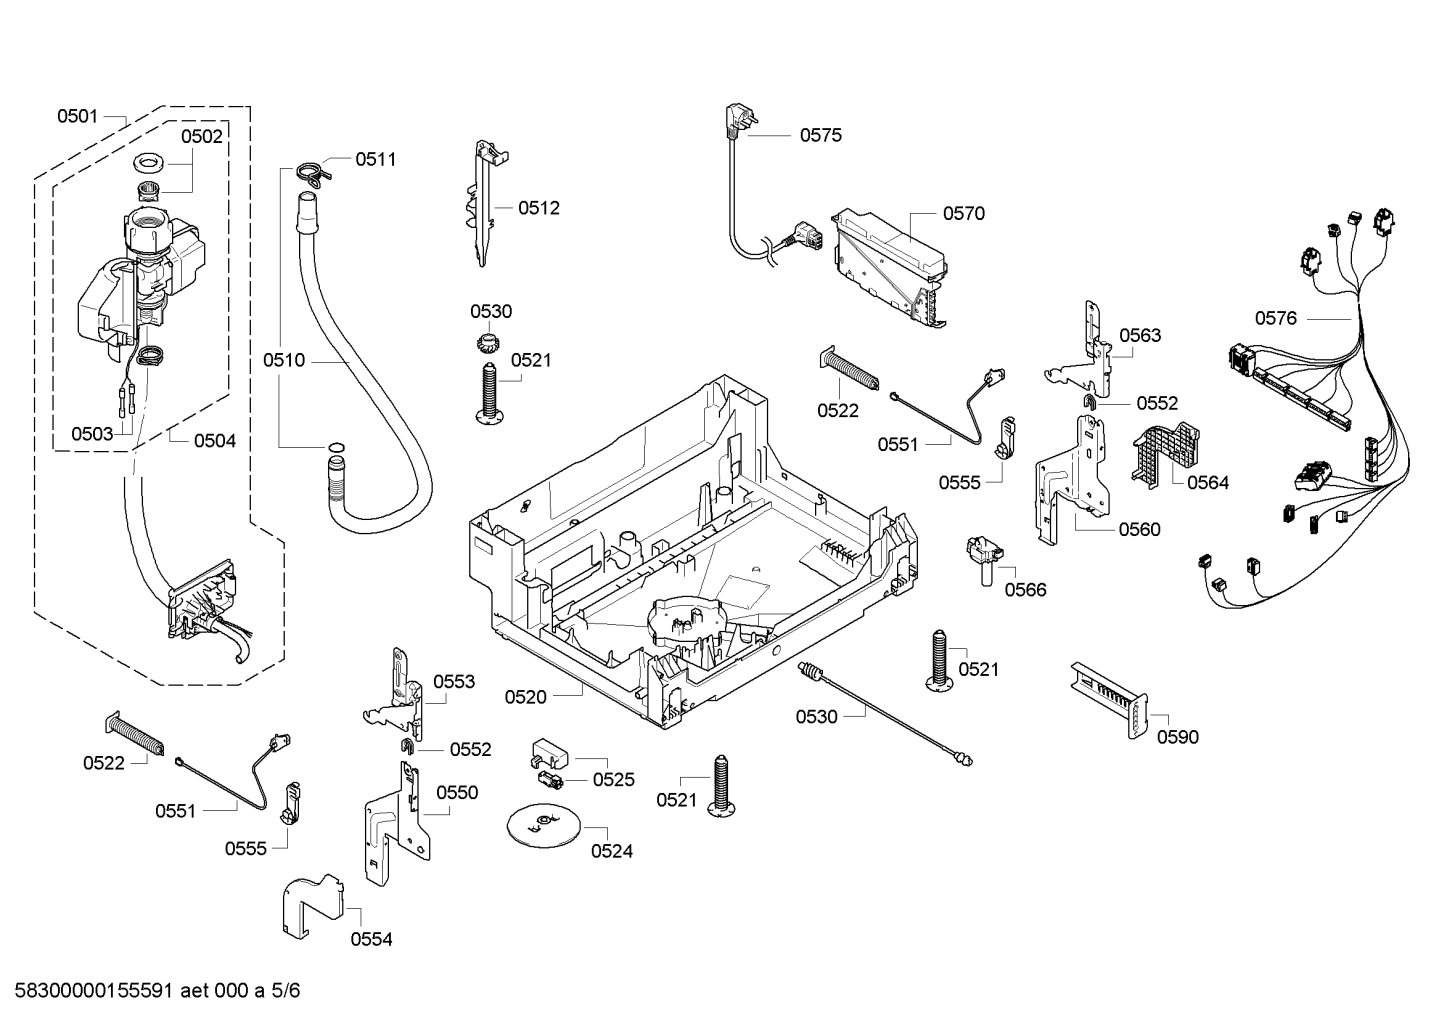 drawing_link_5_device_1766683